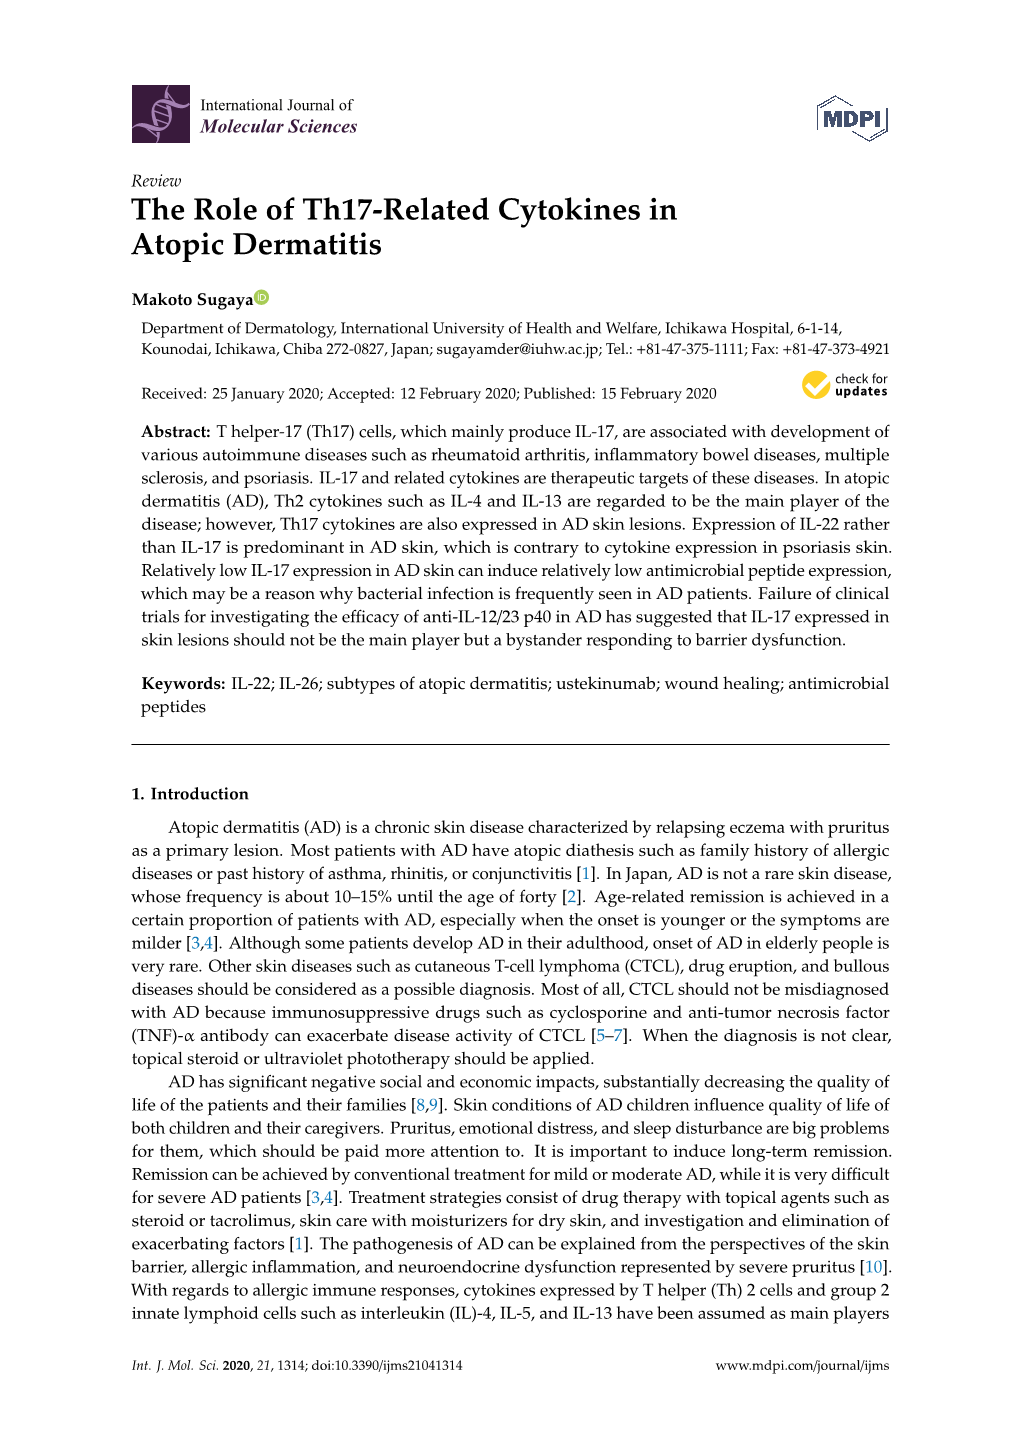 The Role of Th17-Related Cytokines in Atopic Dermatitis